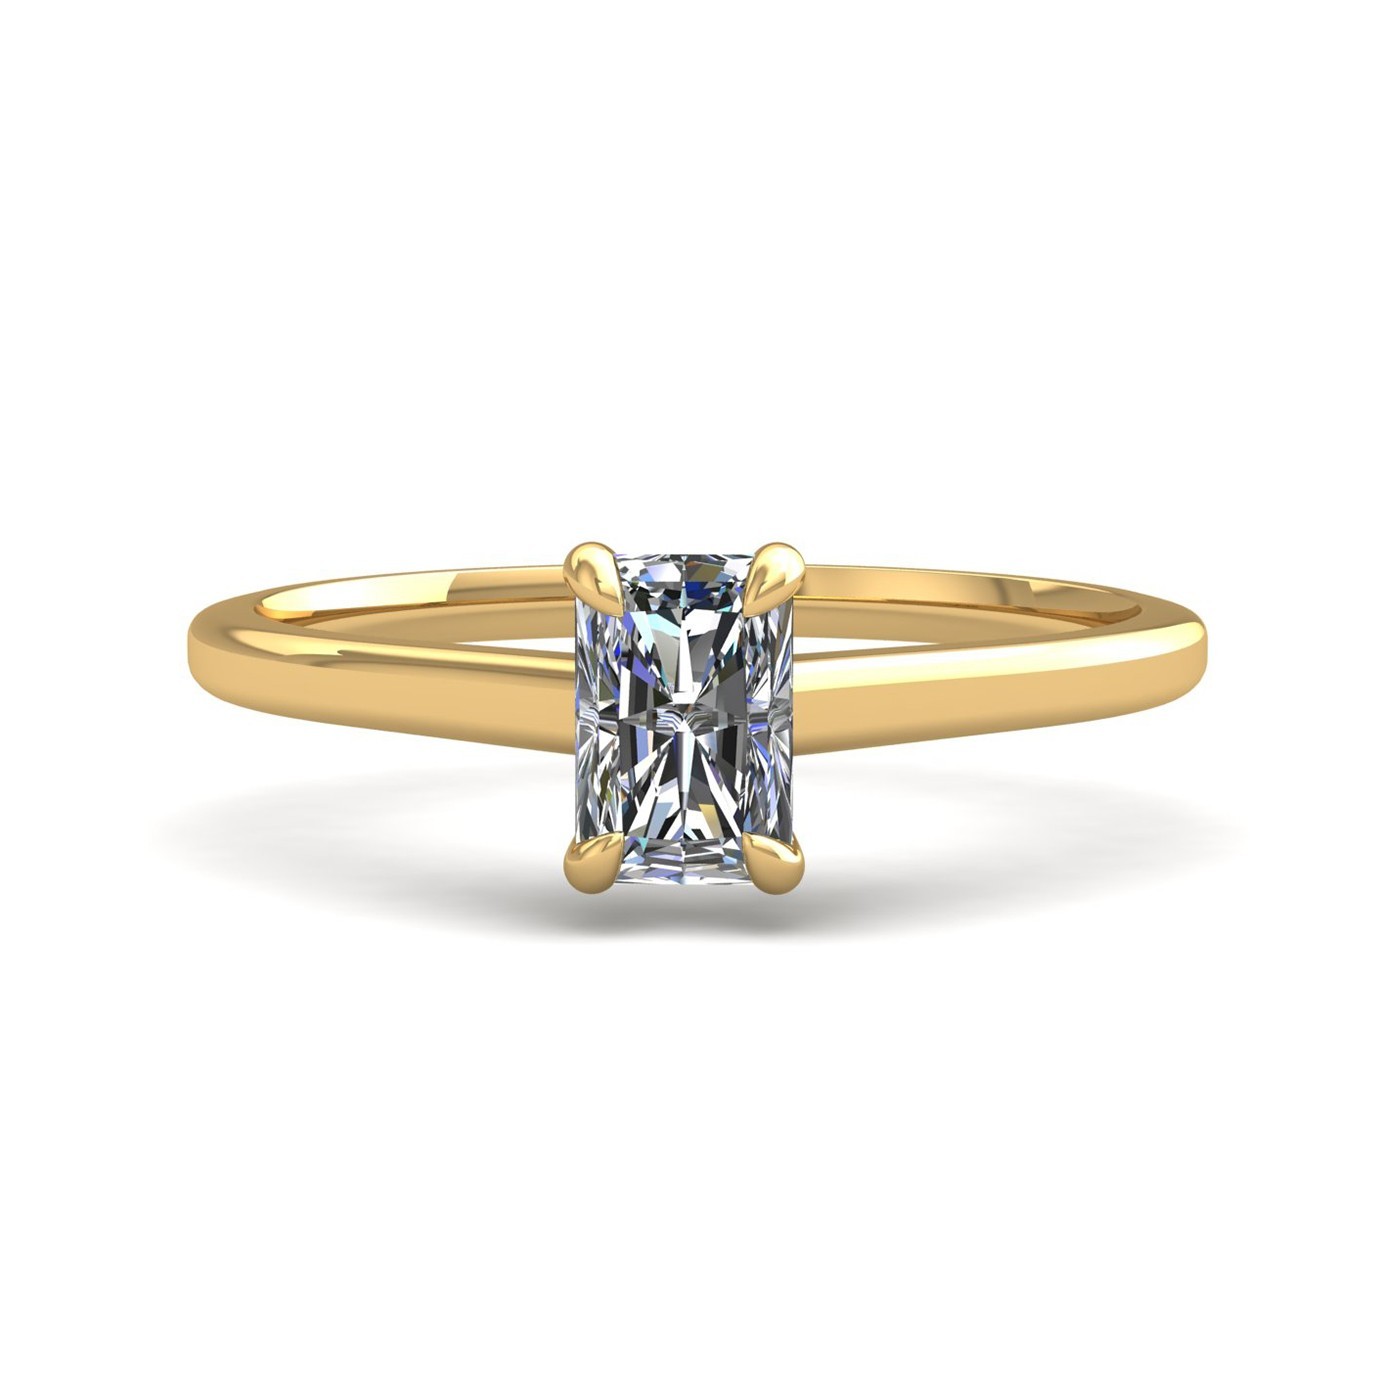 18k yellow gold  2,00 ct 4 prongs solitaire radiant cut diamond engagement ring with whisper thin band Photos & images